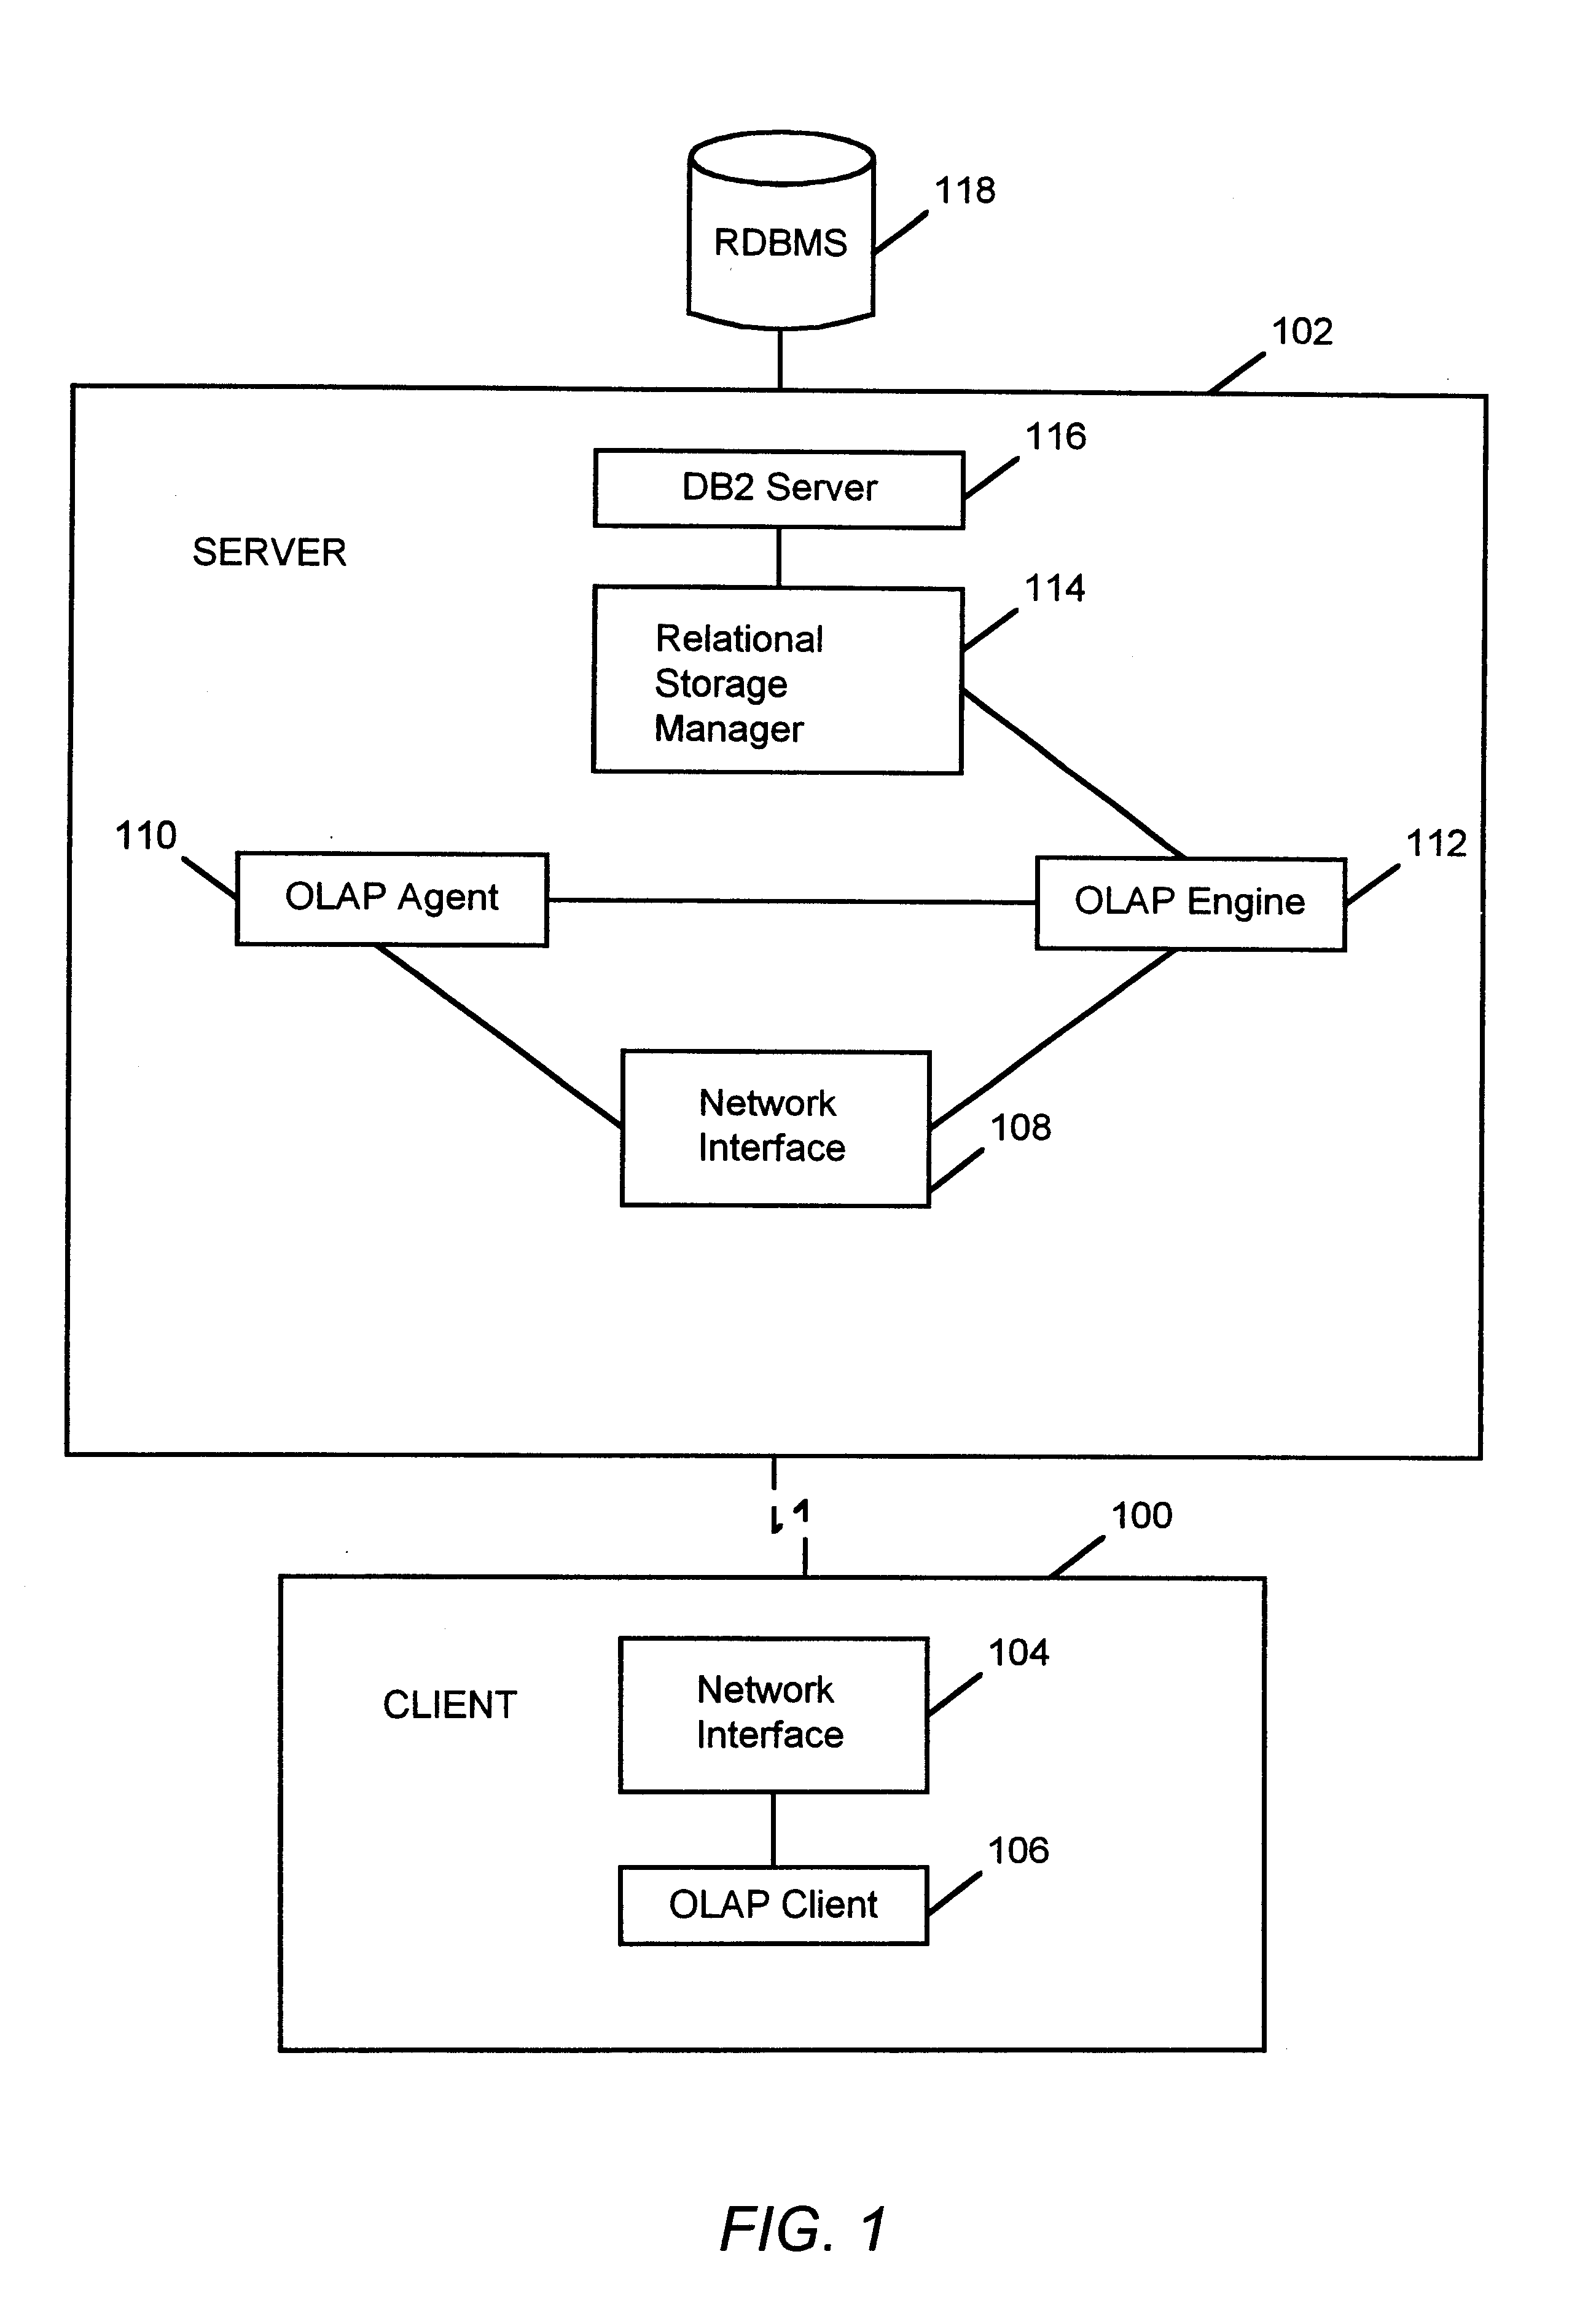 Performance of table insertion by using multiple tables or multiple threads